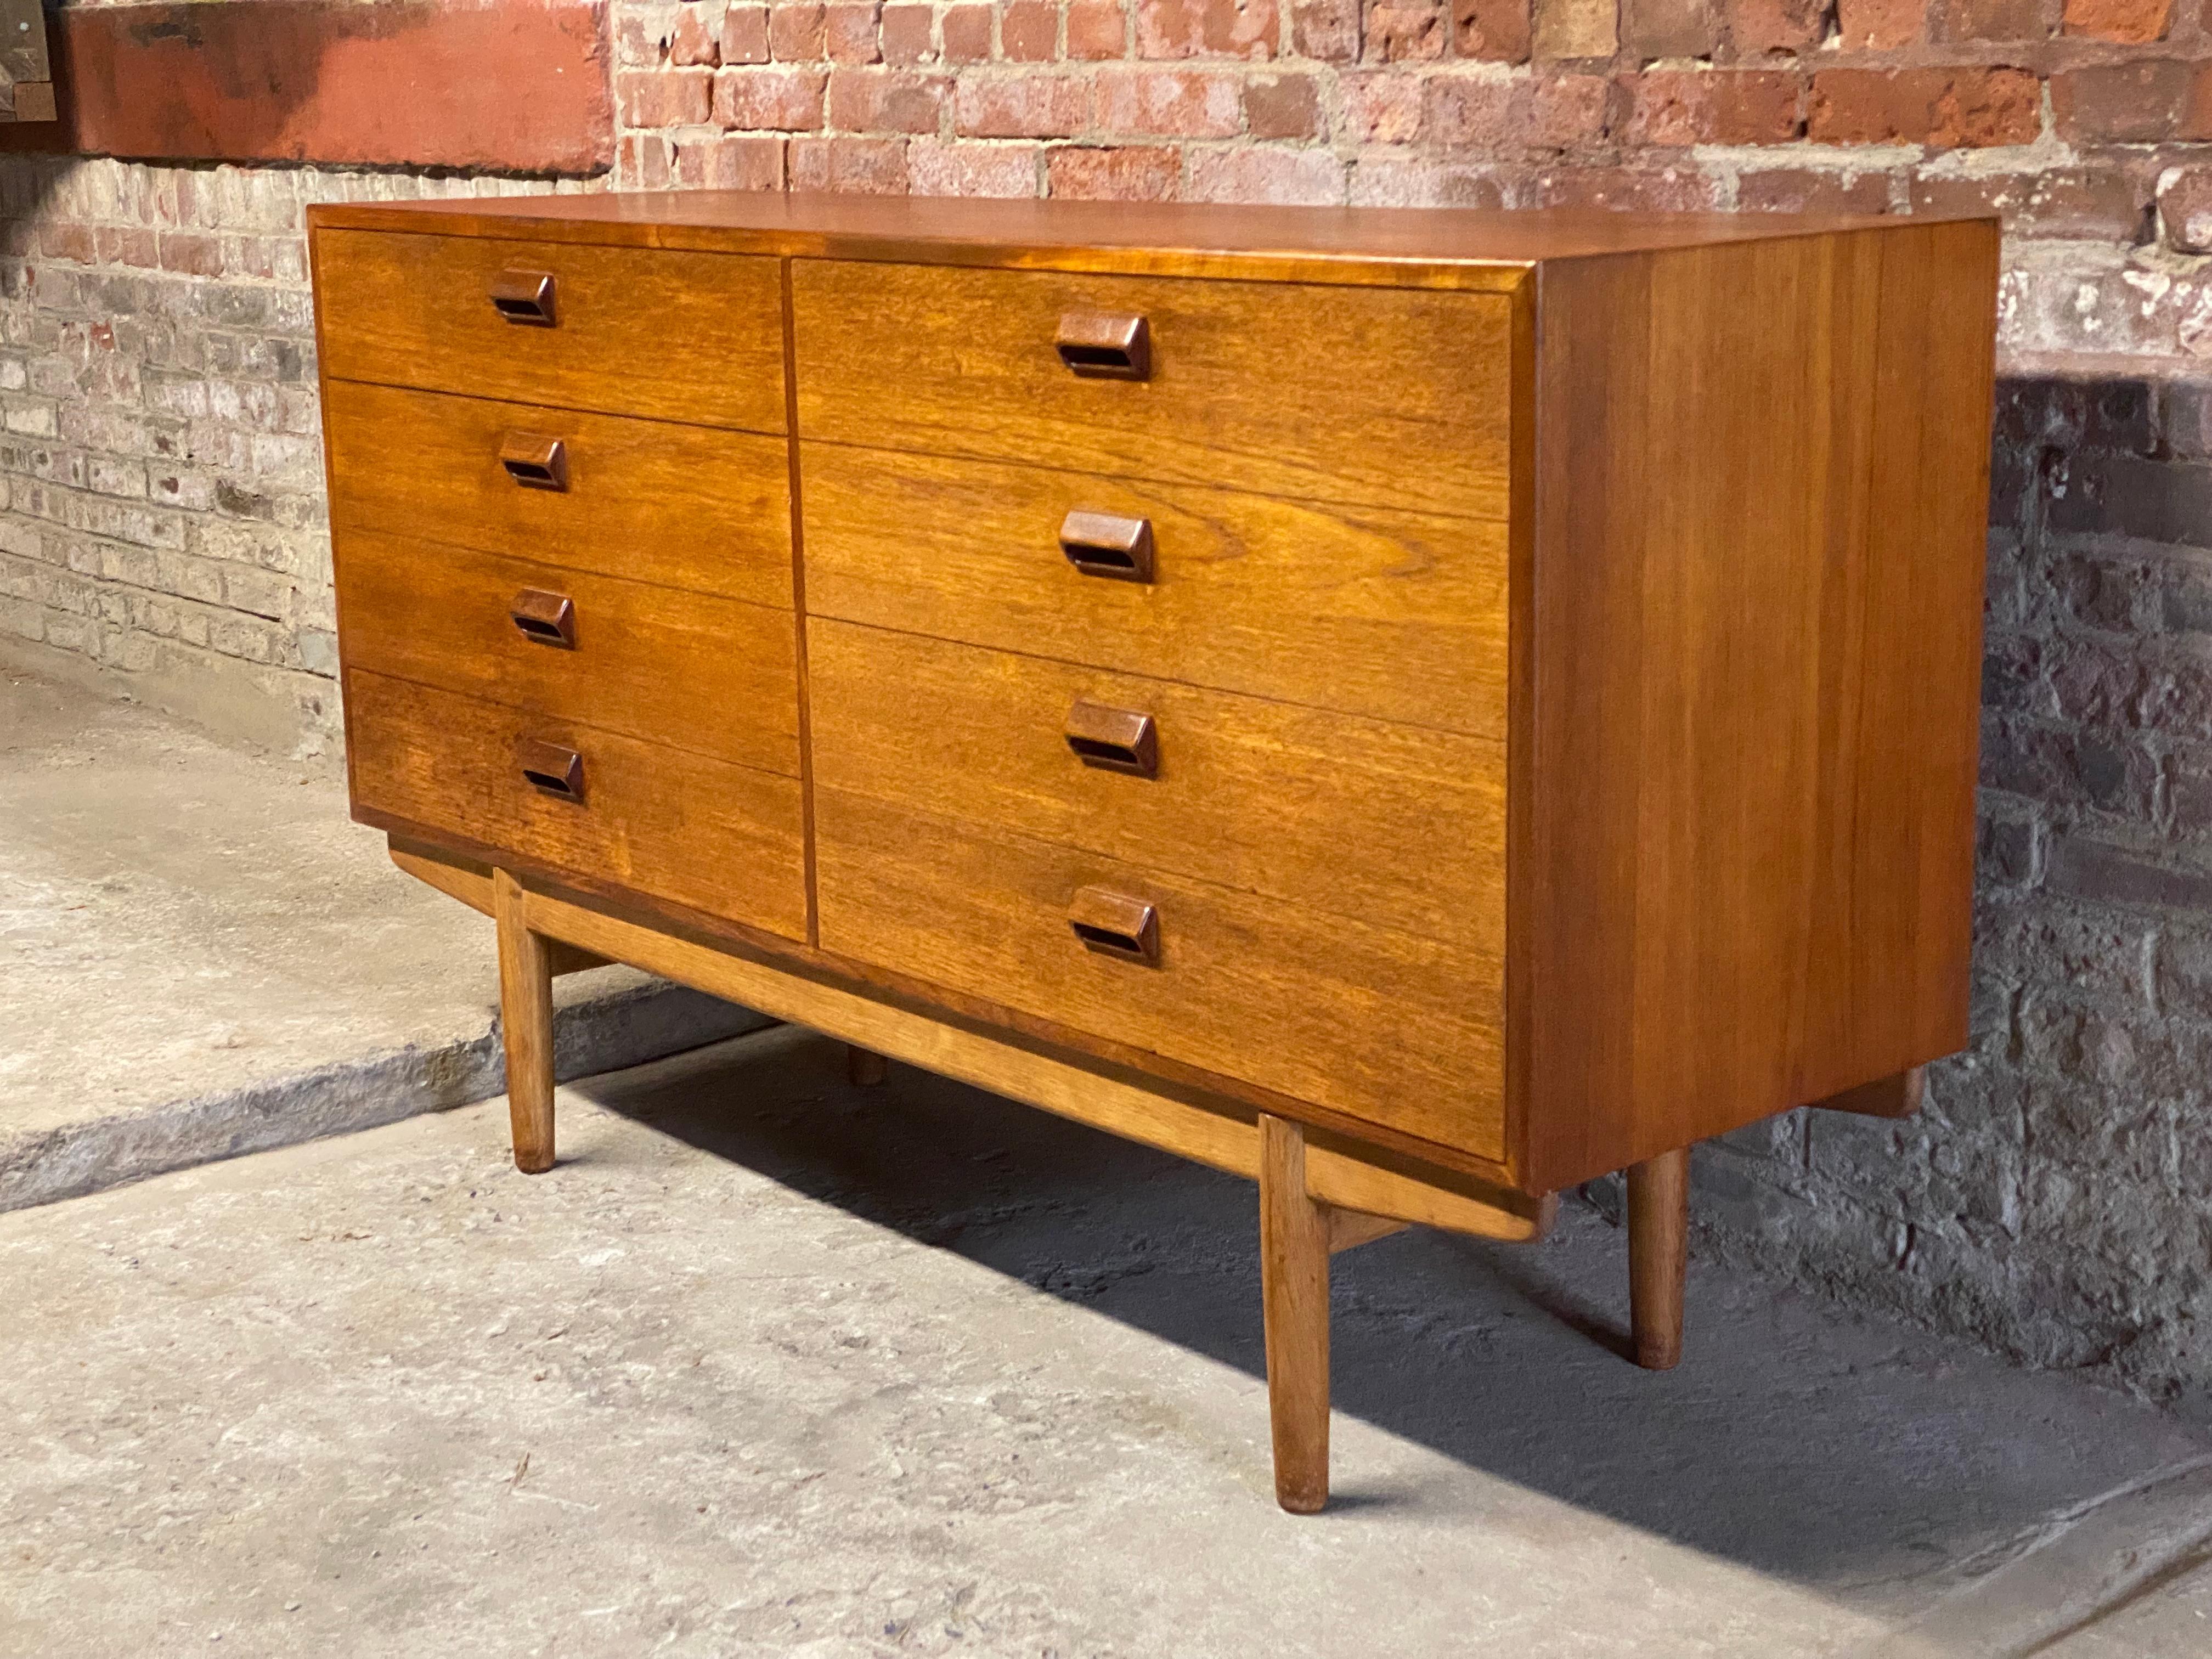 Borge Mogensen for Soborg Mobler teak and oak eight drawer dresser. Teak cabinet with a solid oak base. Circa 1960. Signed on back. Good overall condition with minor wear from age and use. Structurally sound and sturdy construction. No visible